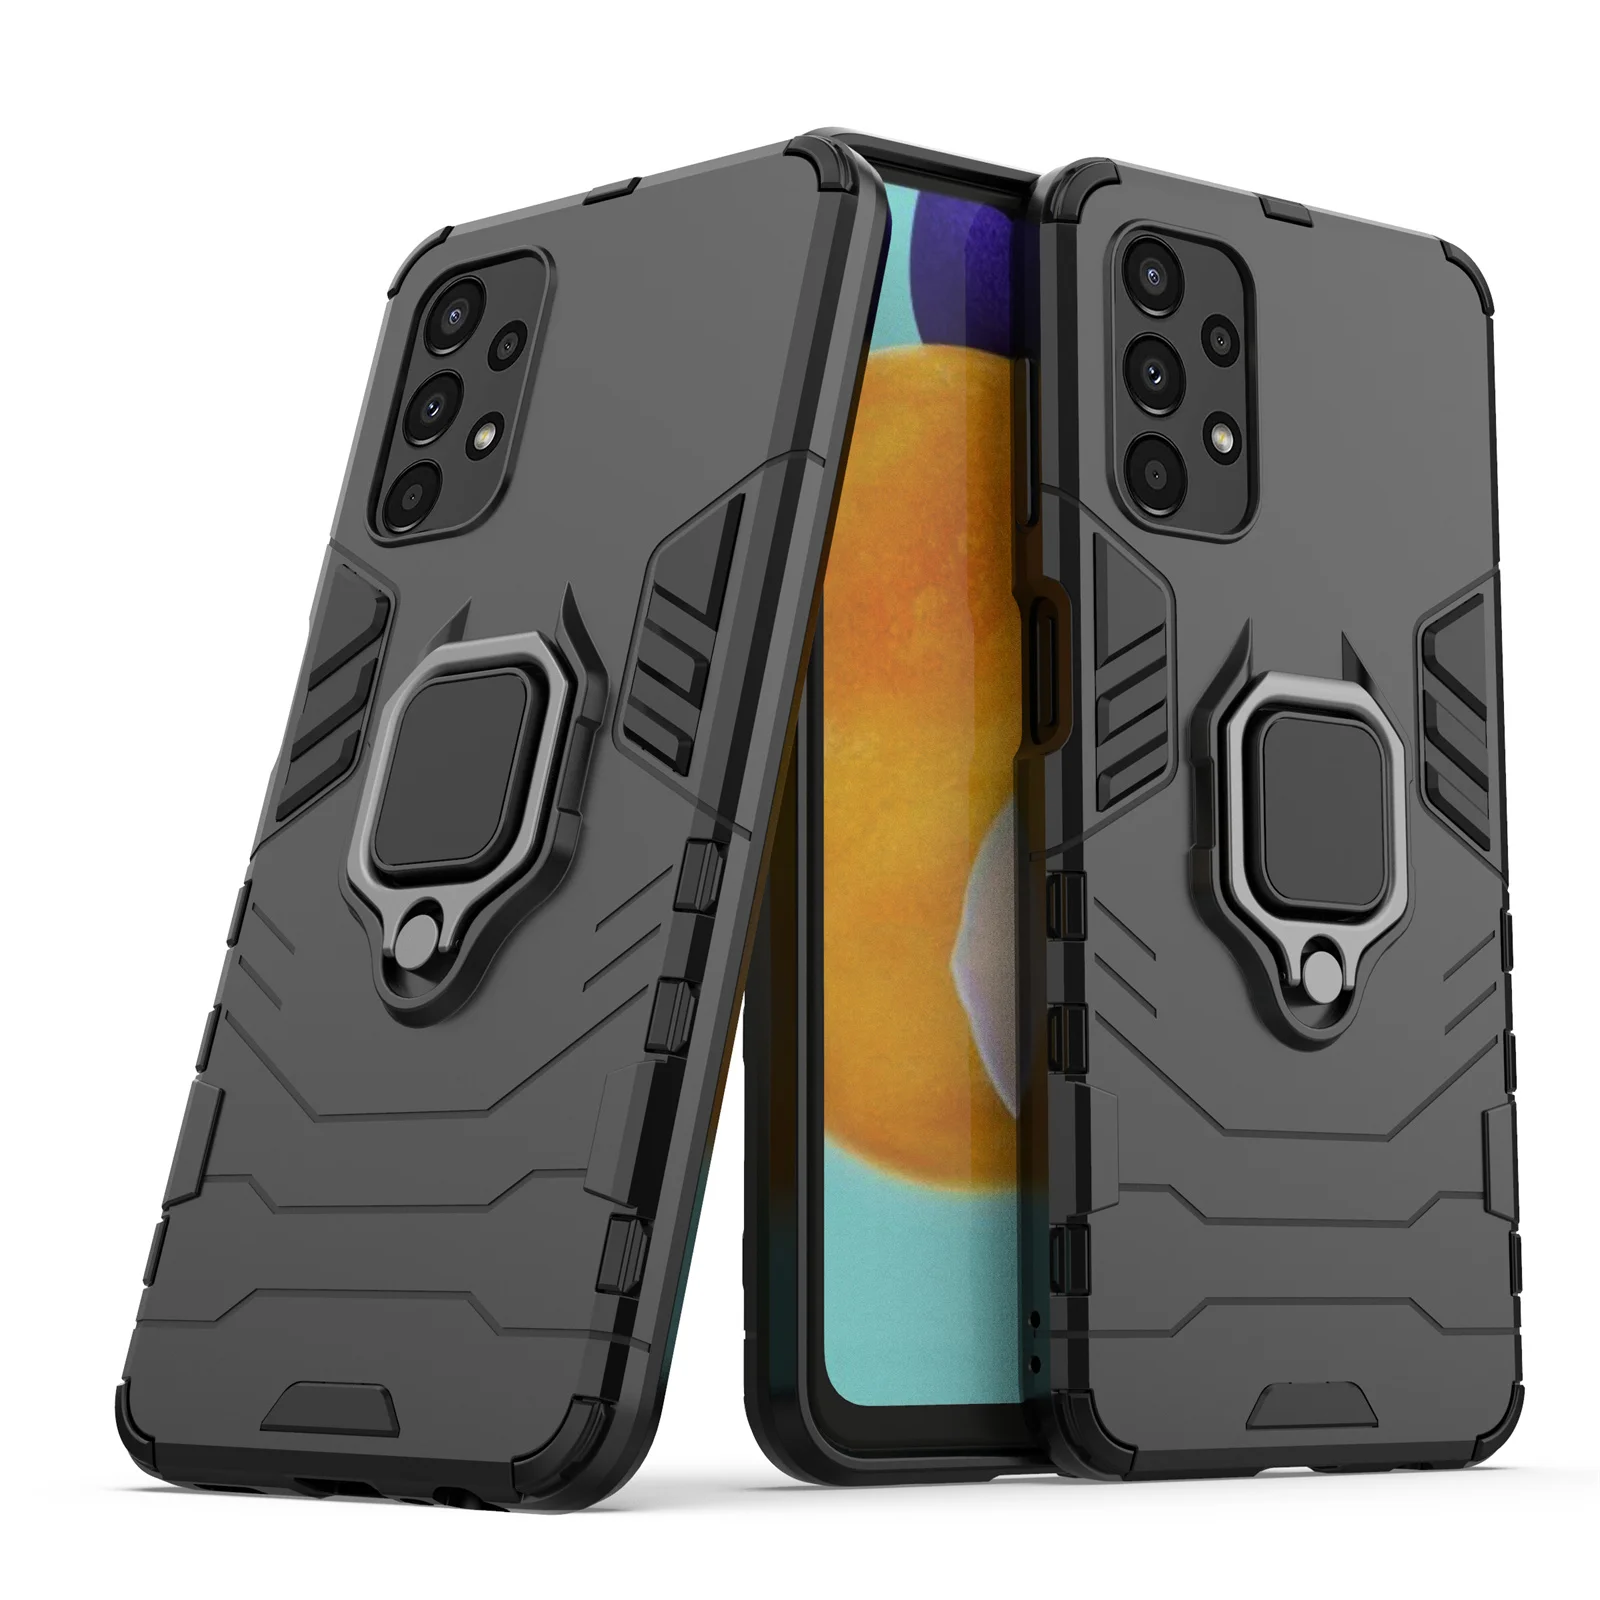 

Wholesale Hard Plastic Kickstand Back Cover For Samsung Galaxy A12 A13 A32 A52 A23 A33 A53 5G Shockproof Mobile Phone Case, As picture shows